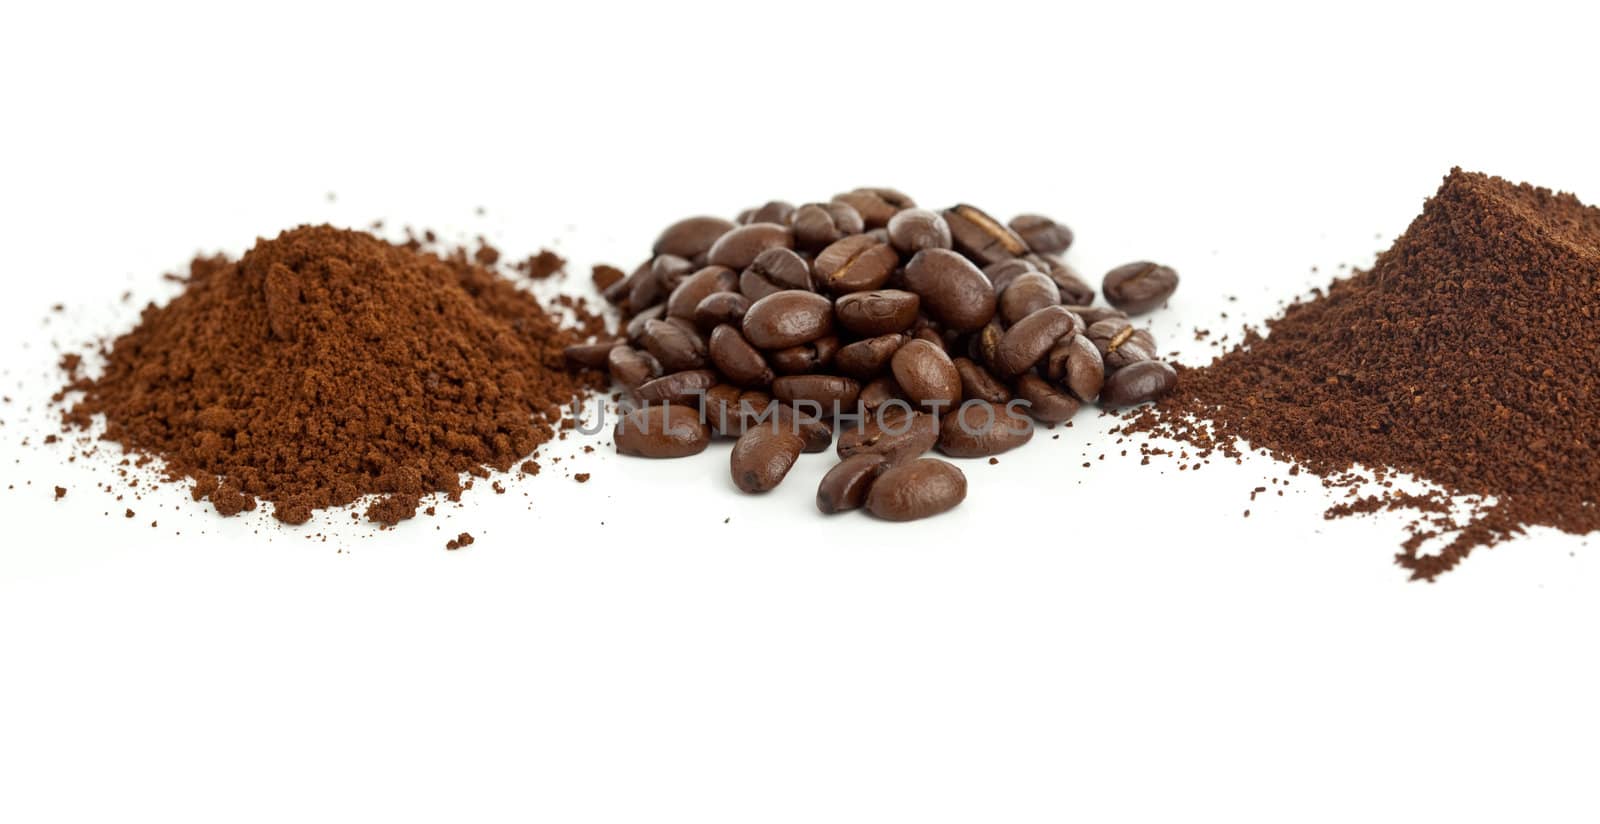 Three types of coffee in a row on white background